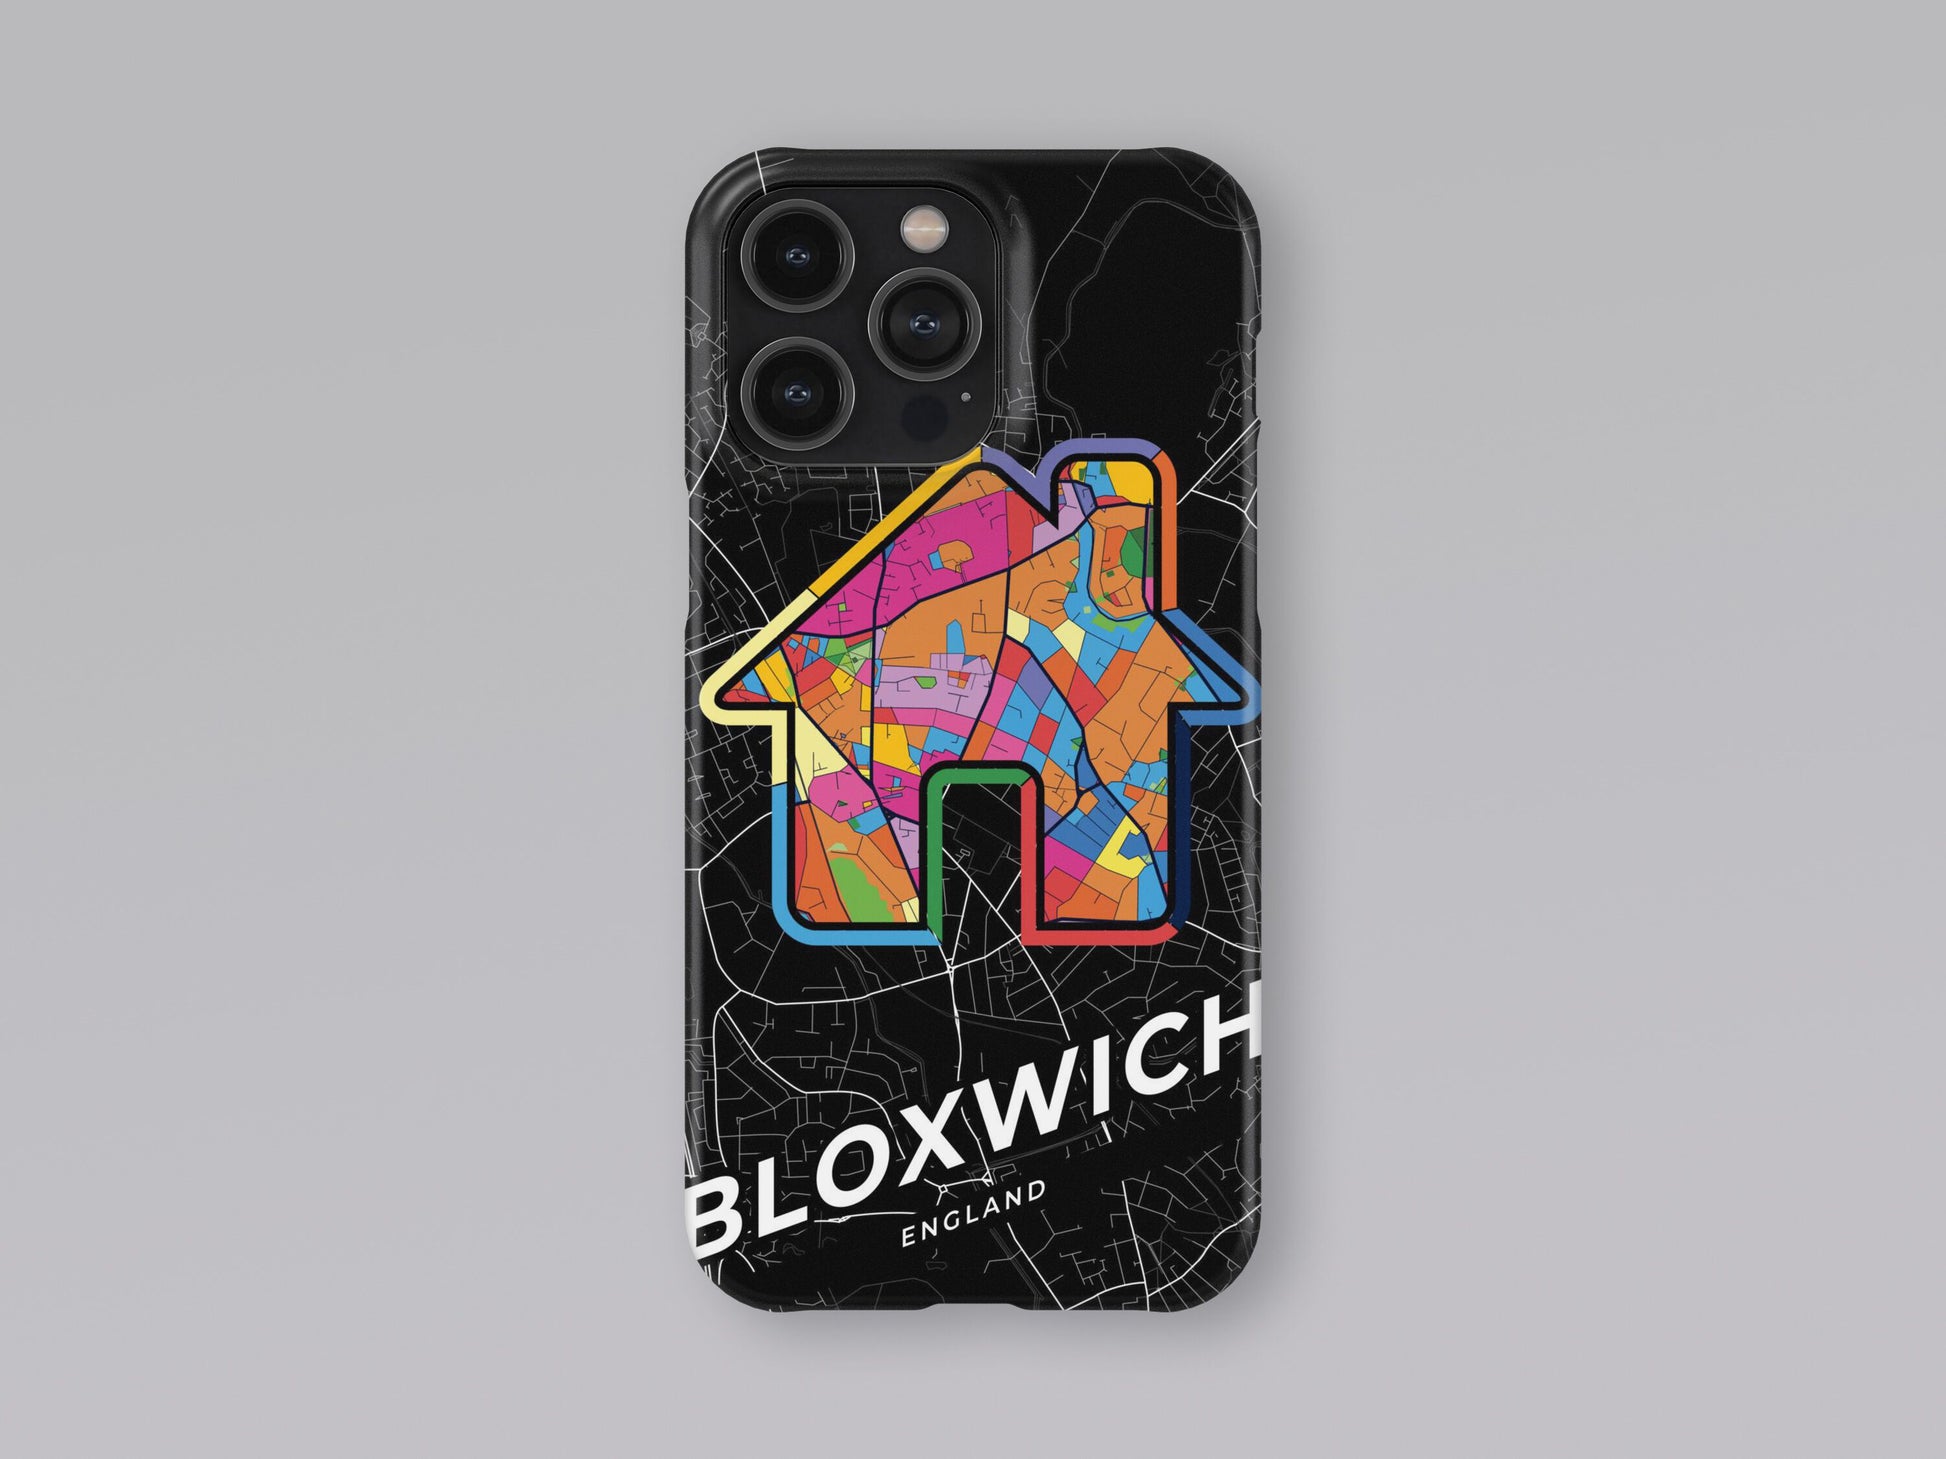 Bloxwich England slim phone case with colorful icon. Birthday, wedding or housewarming gift. Couple match cases. 3